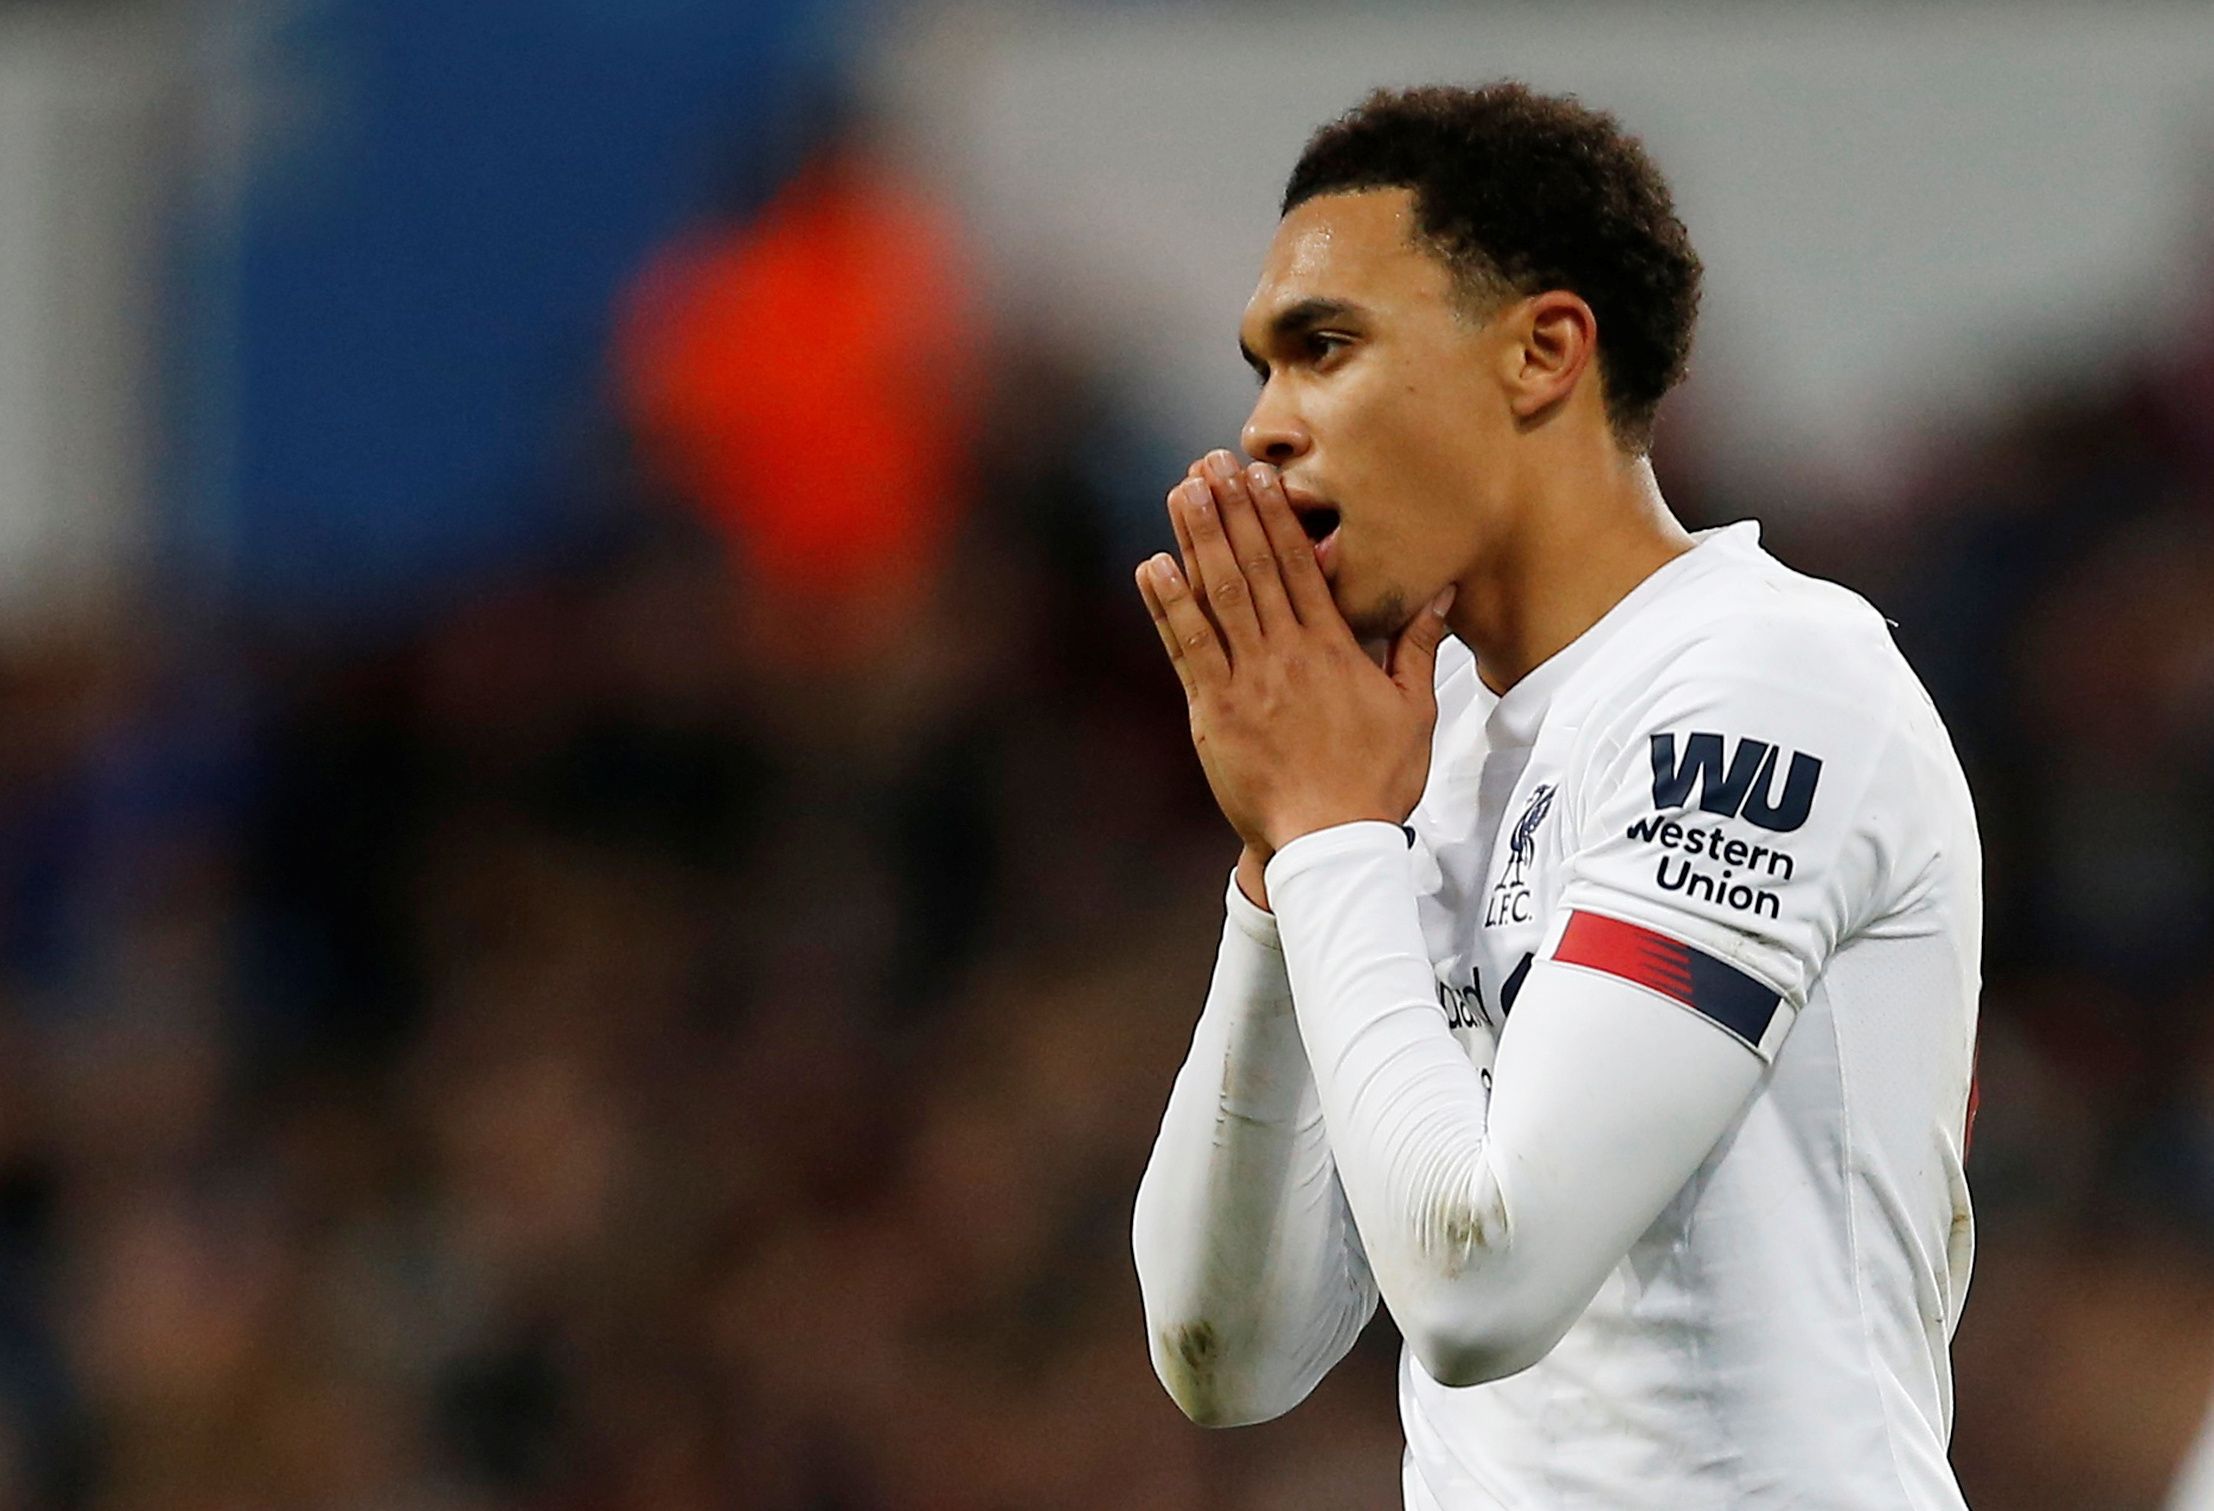 Soccer Football - Premier League - Aston Villa v Liverpool - Villa Park, Birmingham, Britain - November 2, 2019  Liverpool's Trent Alexander-Arnold reacts             Action Images via Reuters/Craig Brough  EDITORIAL USE ONLY. No use with unauthorized audio, video, data, fixture lists, club/league logos or 